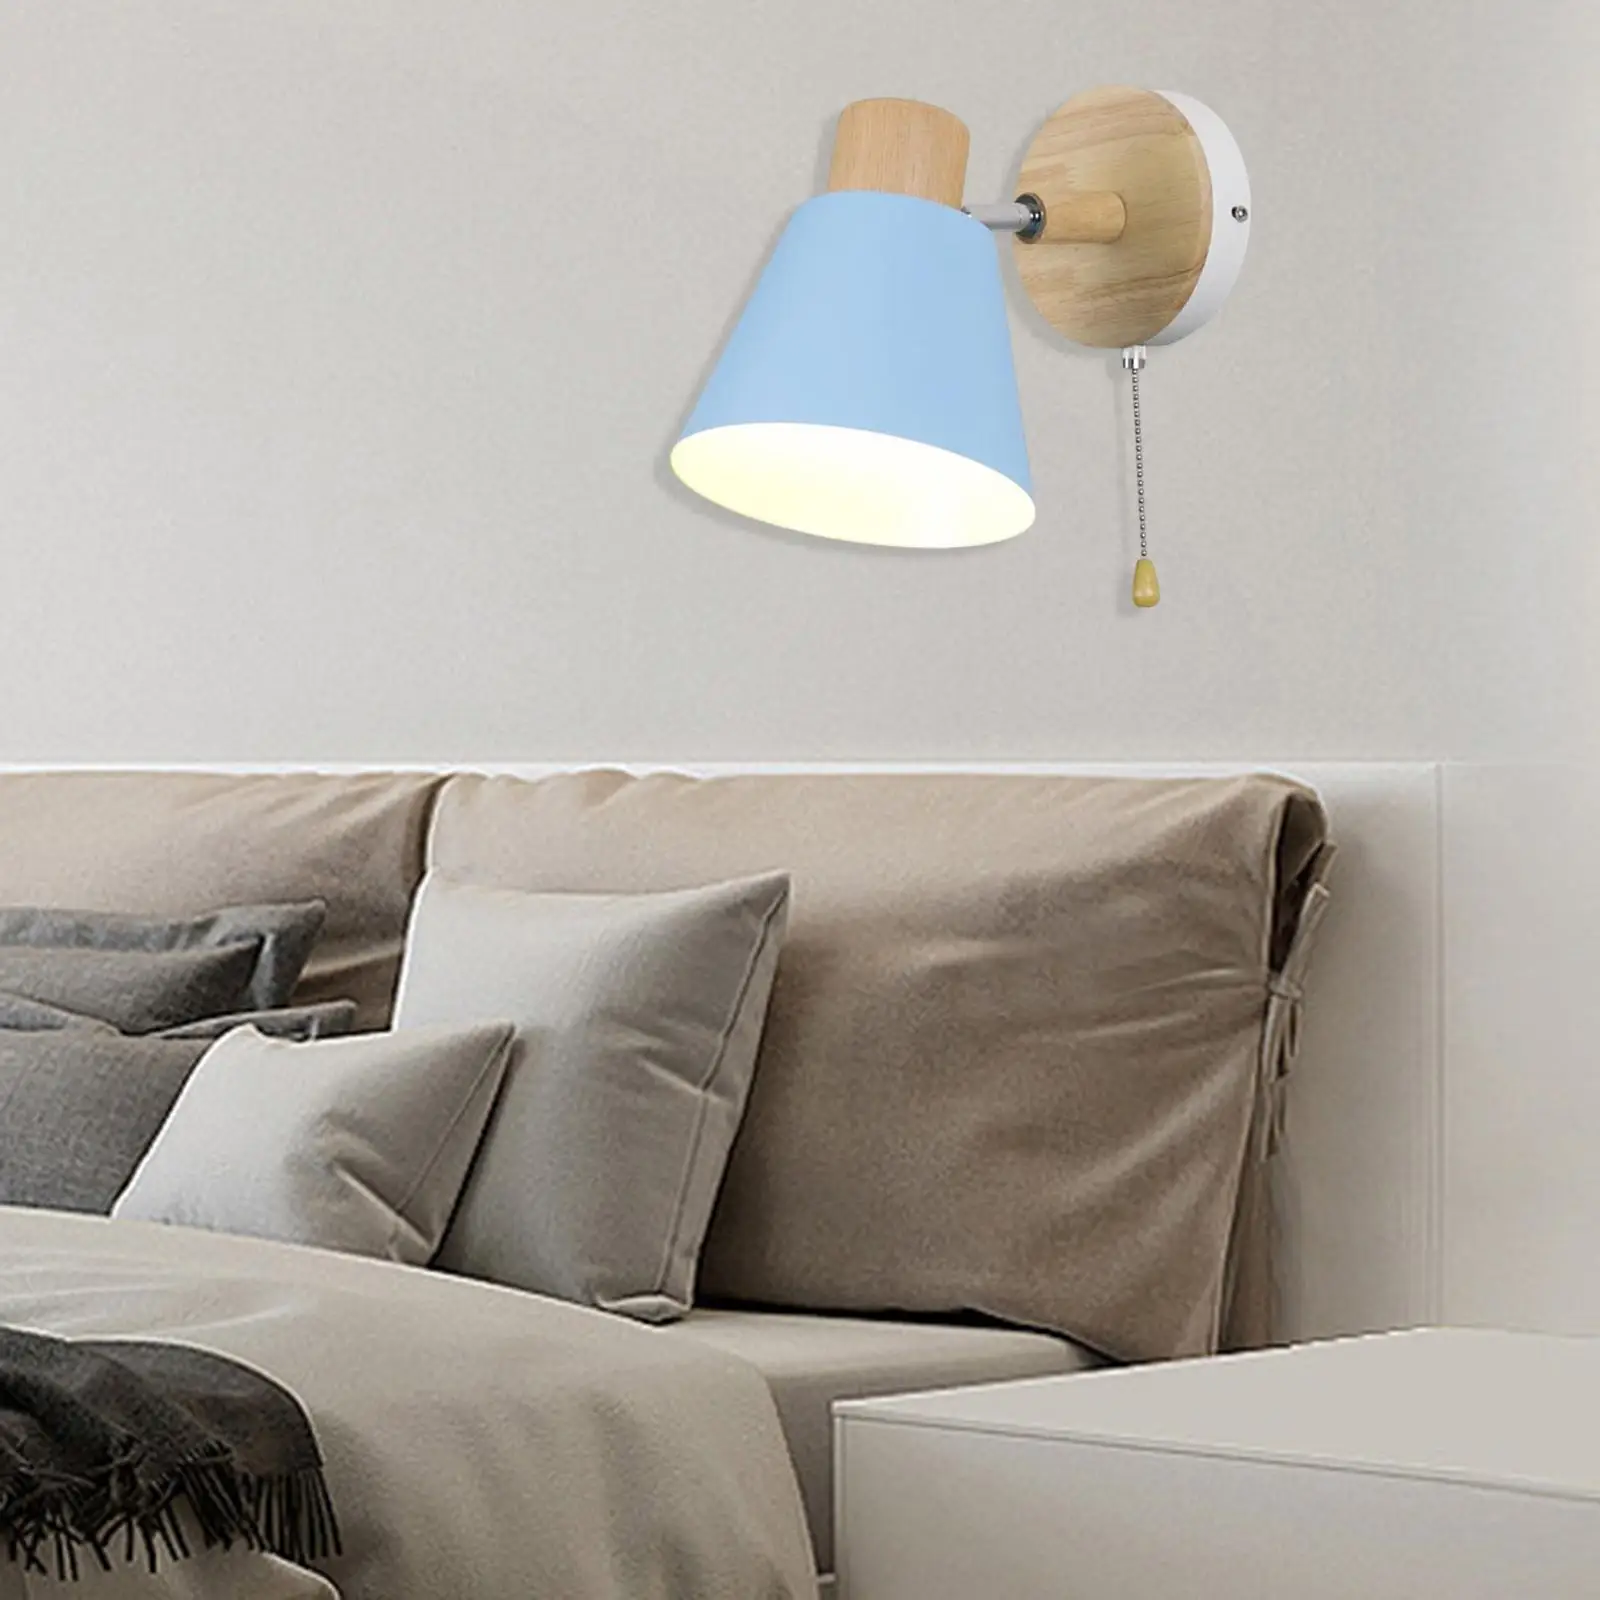 Wall Lamp Light Sconce Adjustable with Pull Chain Switch for Bedroom Decor